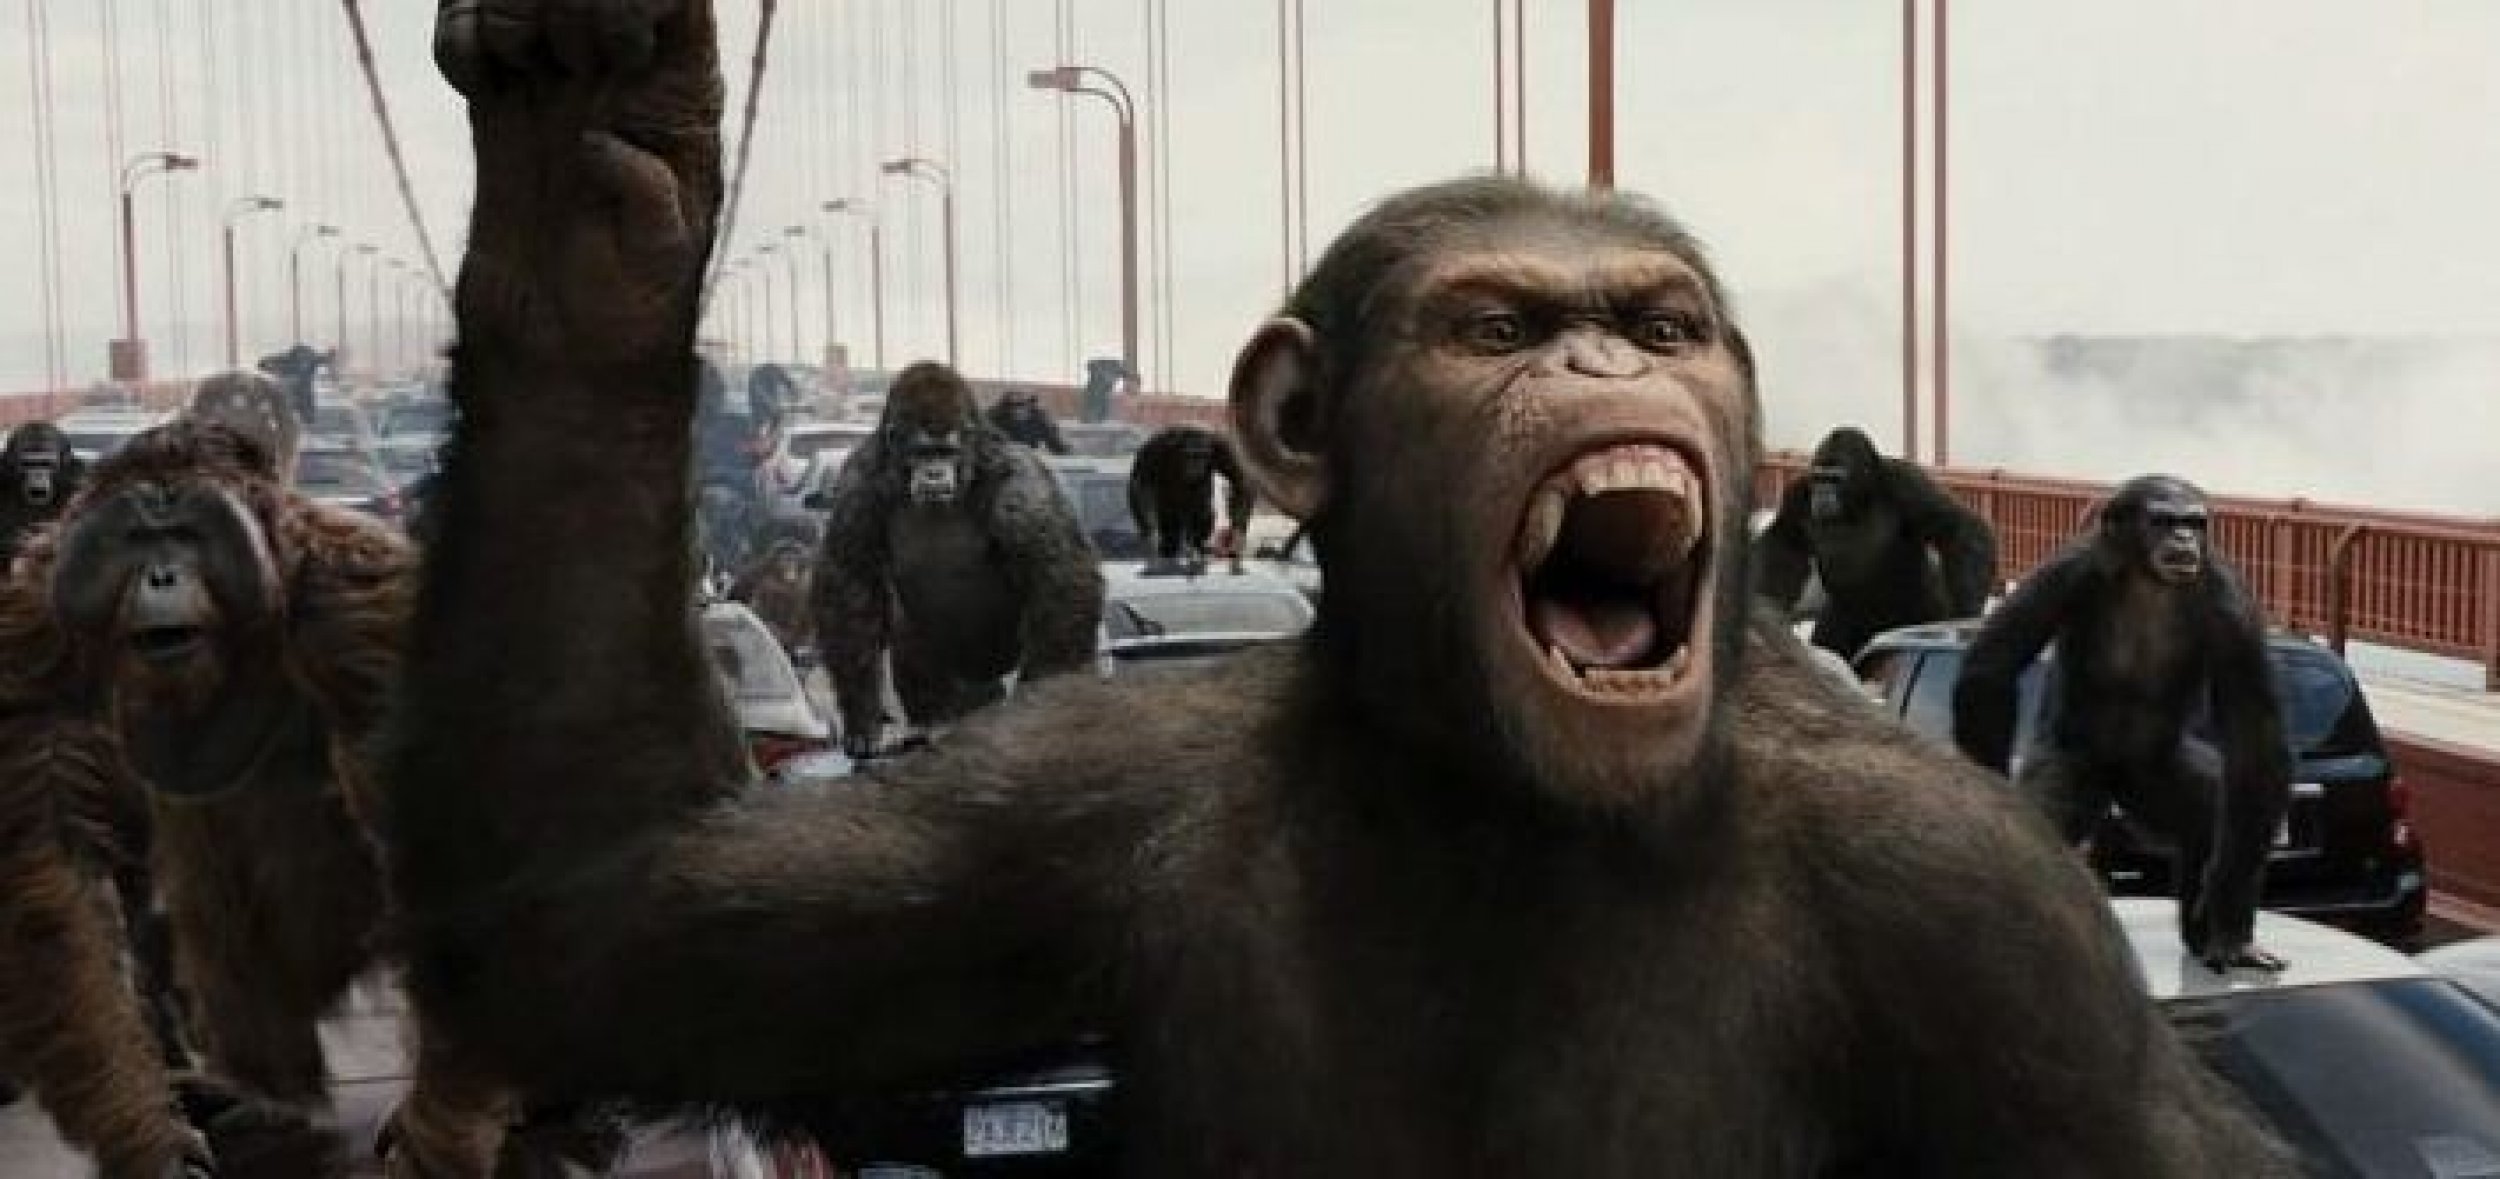 Apes Rule Theaters as 'Rise of the of the Apes' Tops Box Office With 77.4 Million IBTimes